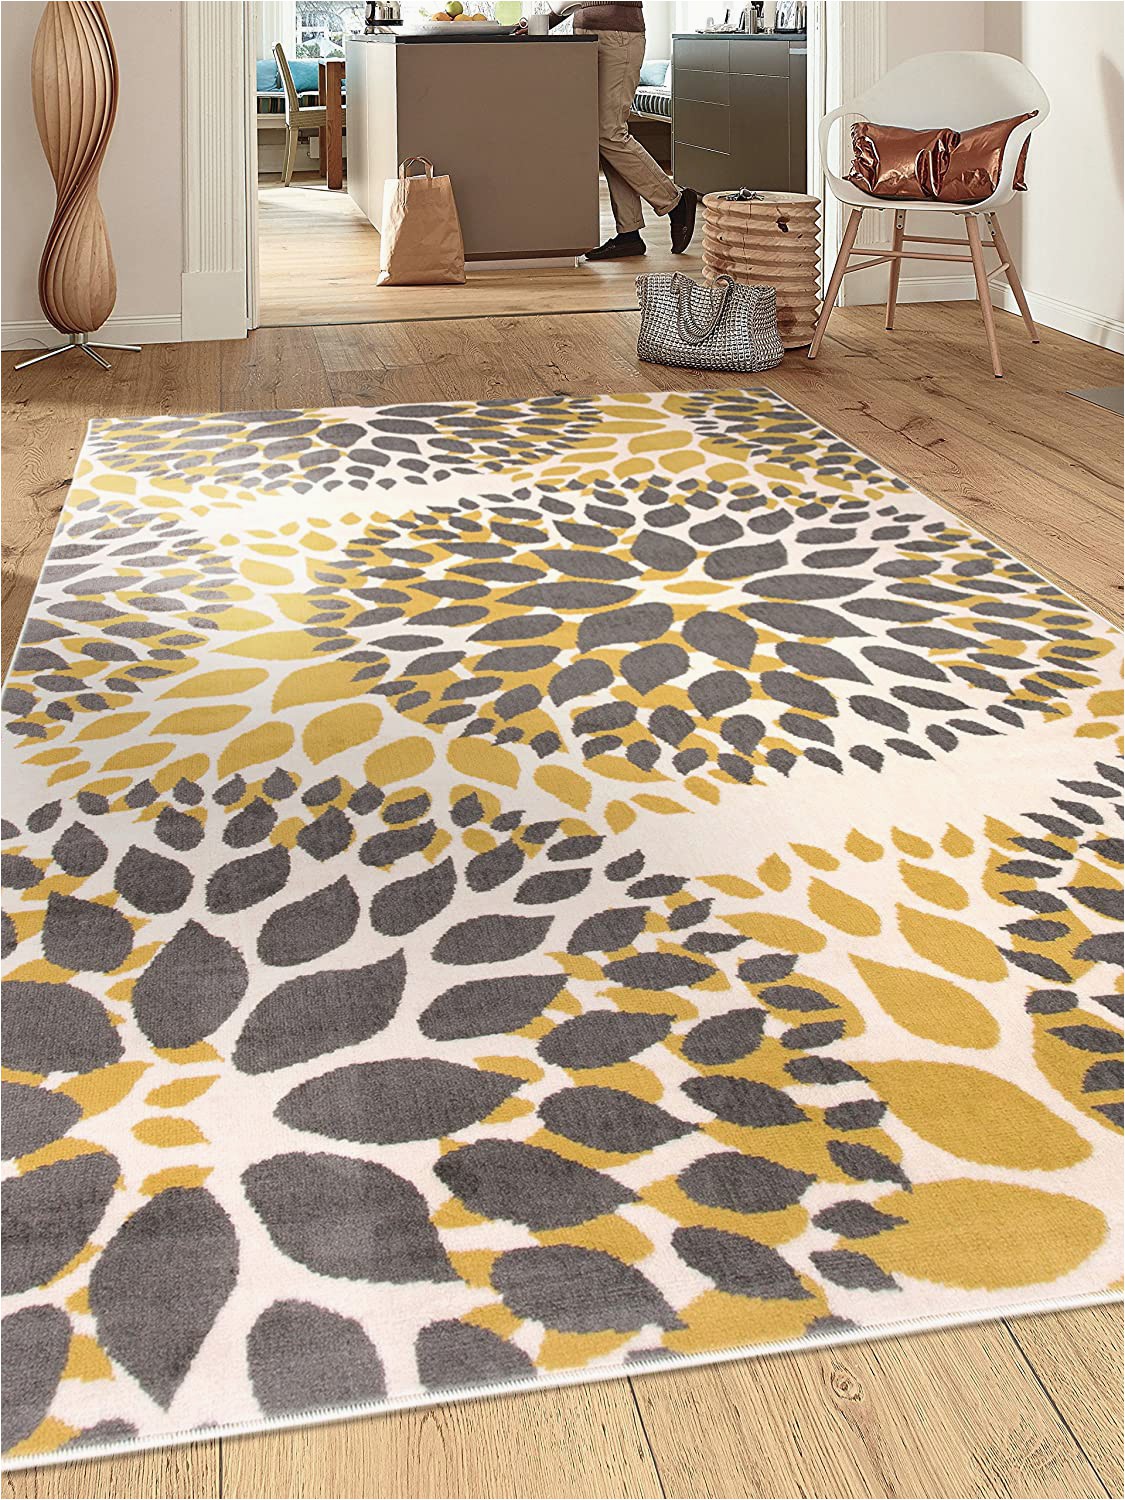 Modern Floral Circles area Rug Modern Floral Circles Design area Rugs 7 6" X 9 5" Yellow